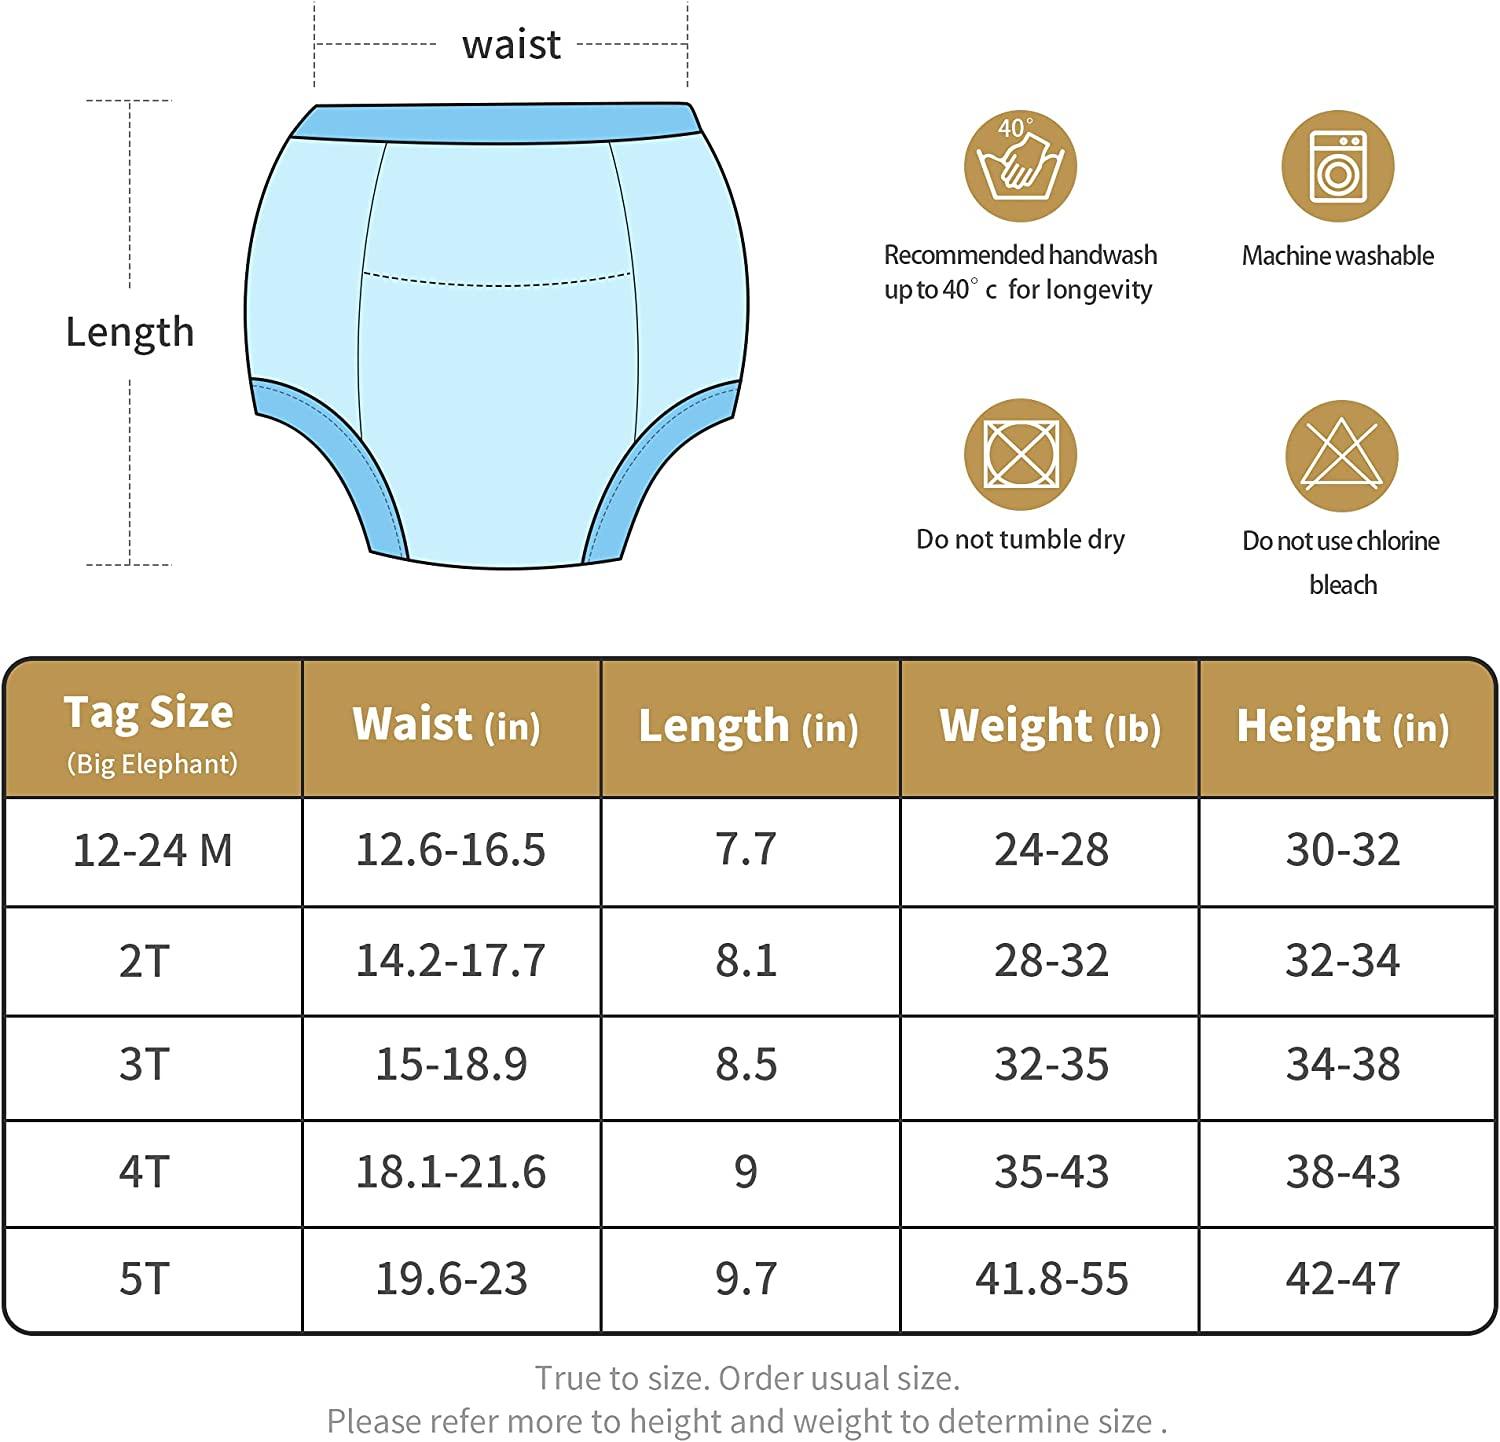 BIG ELEPHANT Toddler Potty Training Pants Baby Boys Underwear, 3T Car Group  3T (10 Count)